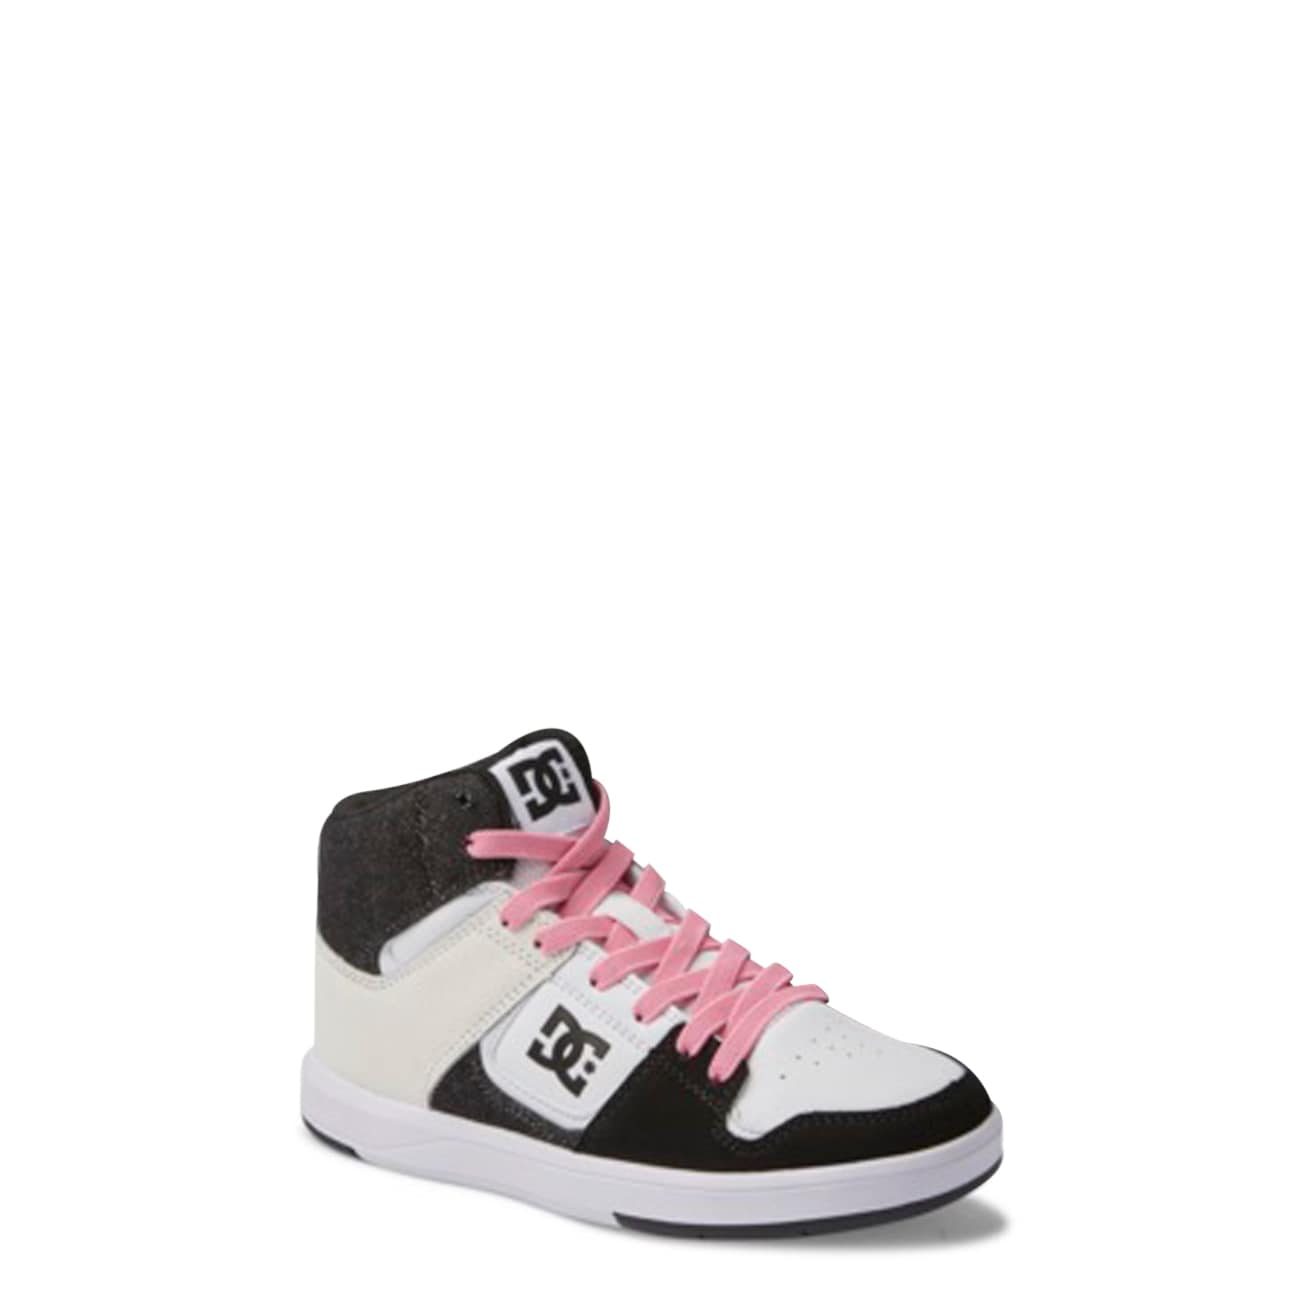 Youth Girls' Cure High Top Sneaker